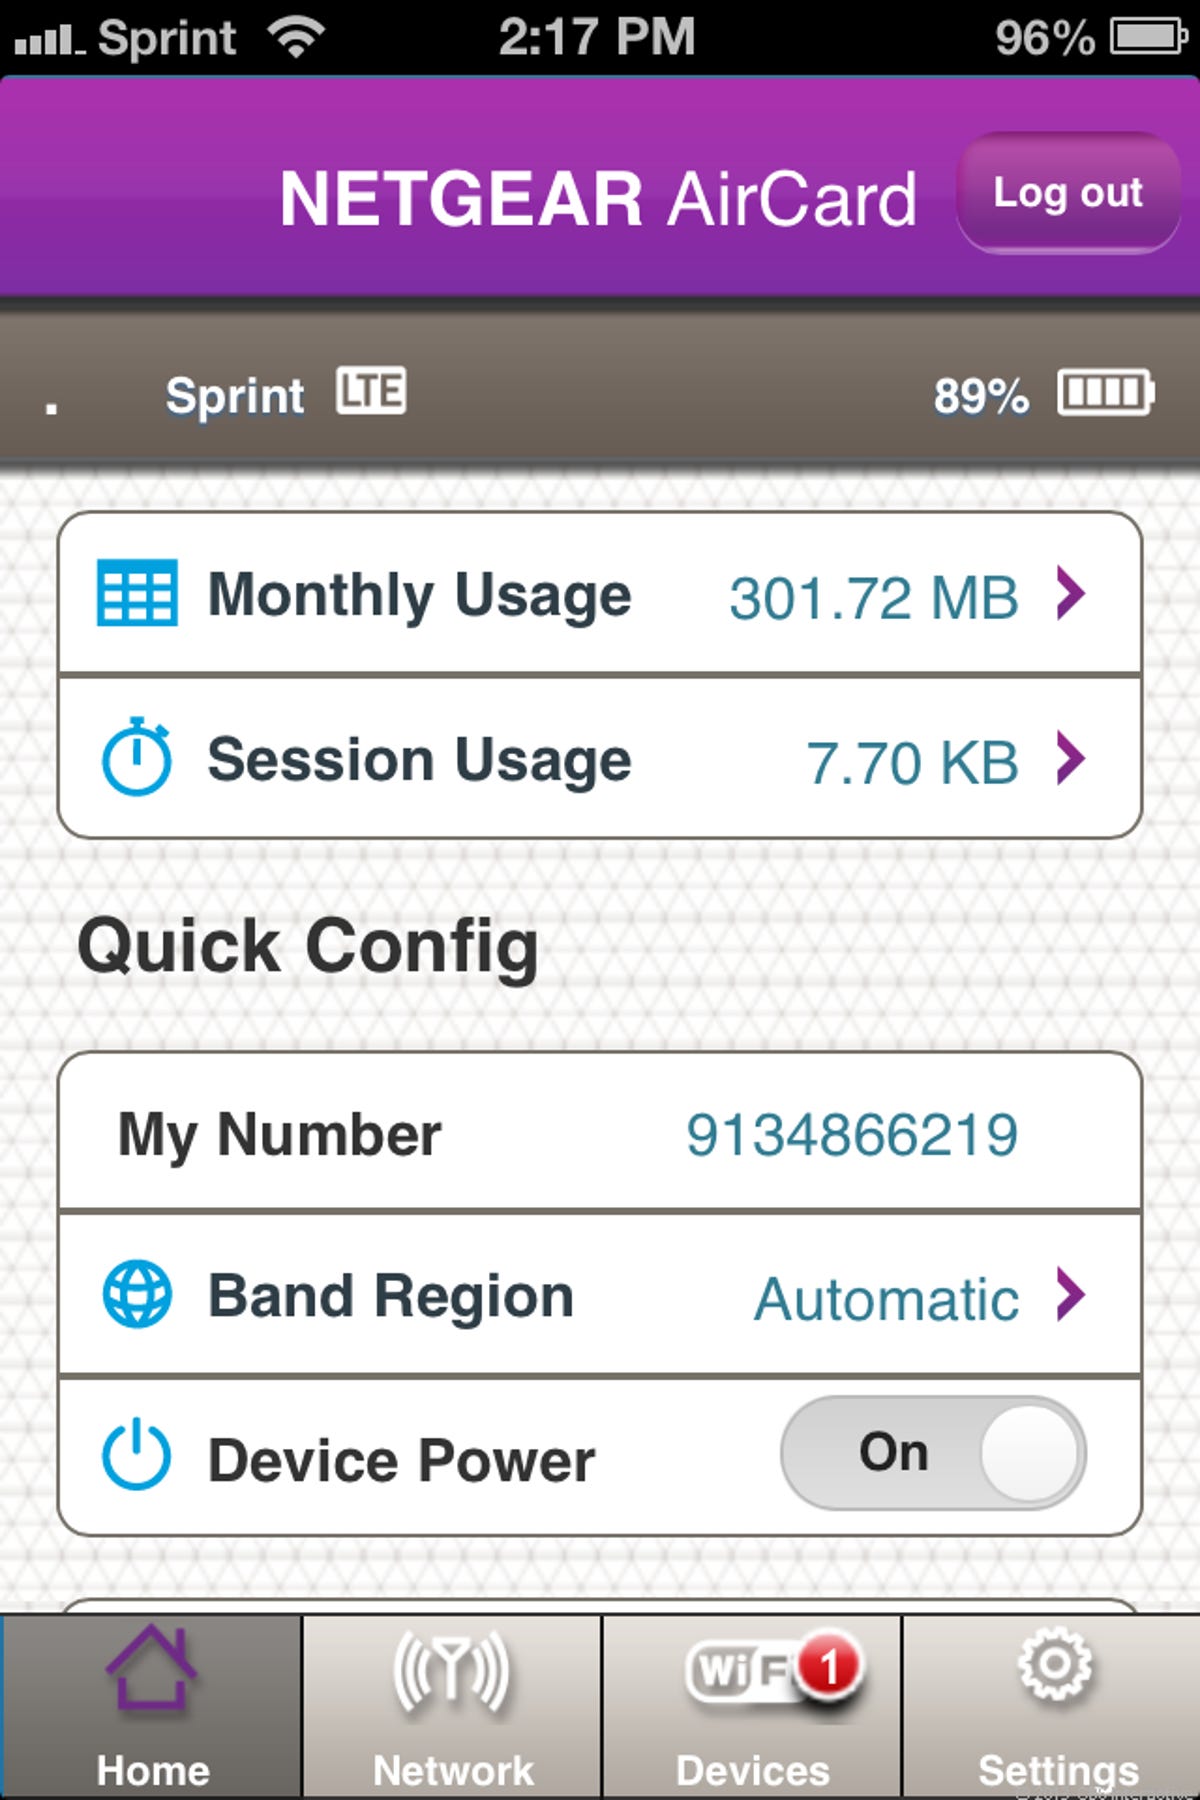 The app provides a convenient way to monitor the router's status and customize its settings.